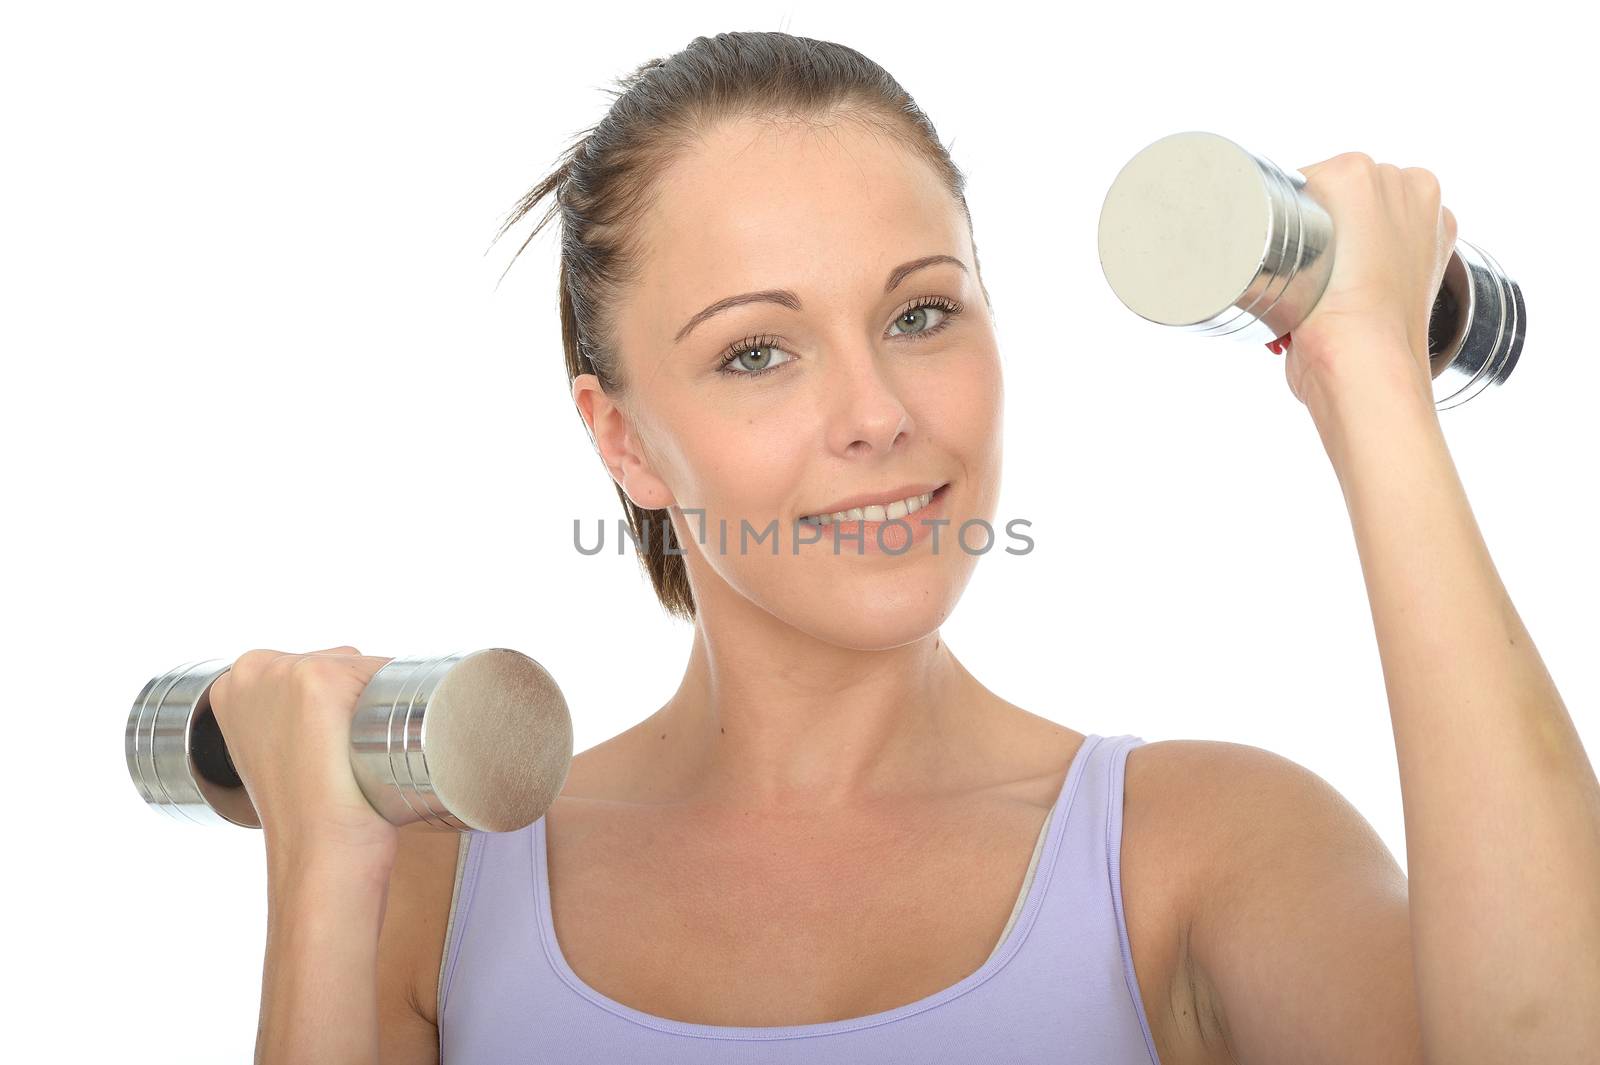 Healthy Young Woman Training With Dumb Bell Weights by Whiteboxmedia